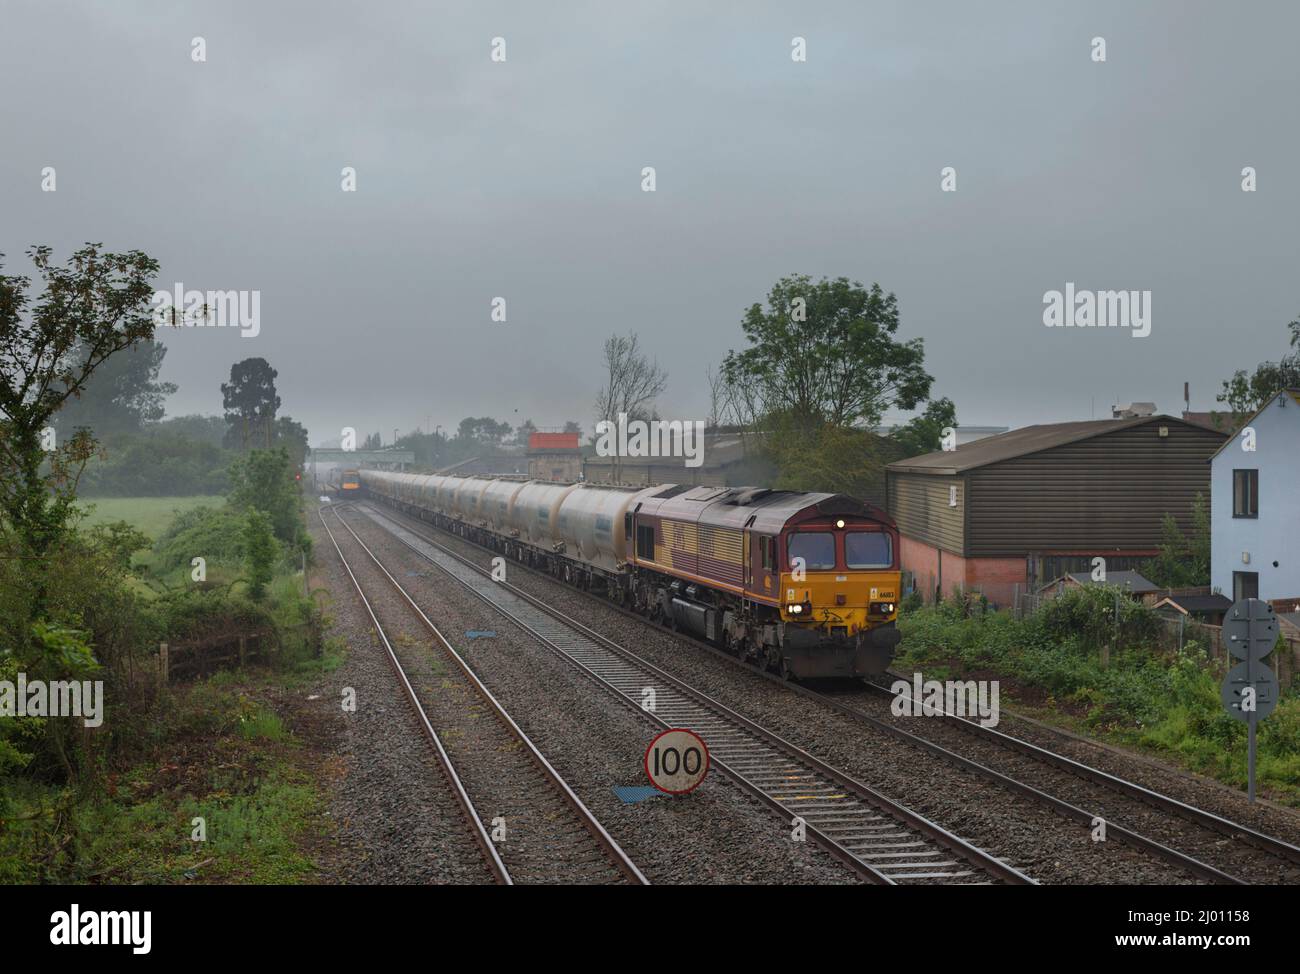 DB Cargo rail UK class 66 locomotive 66183 passing Ashchurch for Tewkesbury with a freight train of empty Castle cement tanks Stock Photo